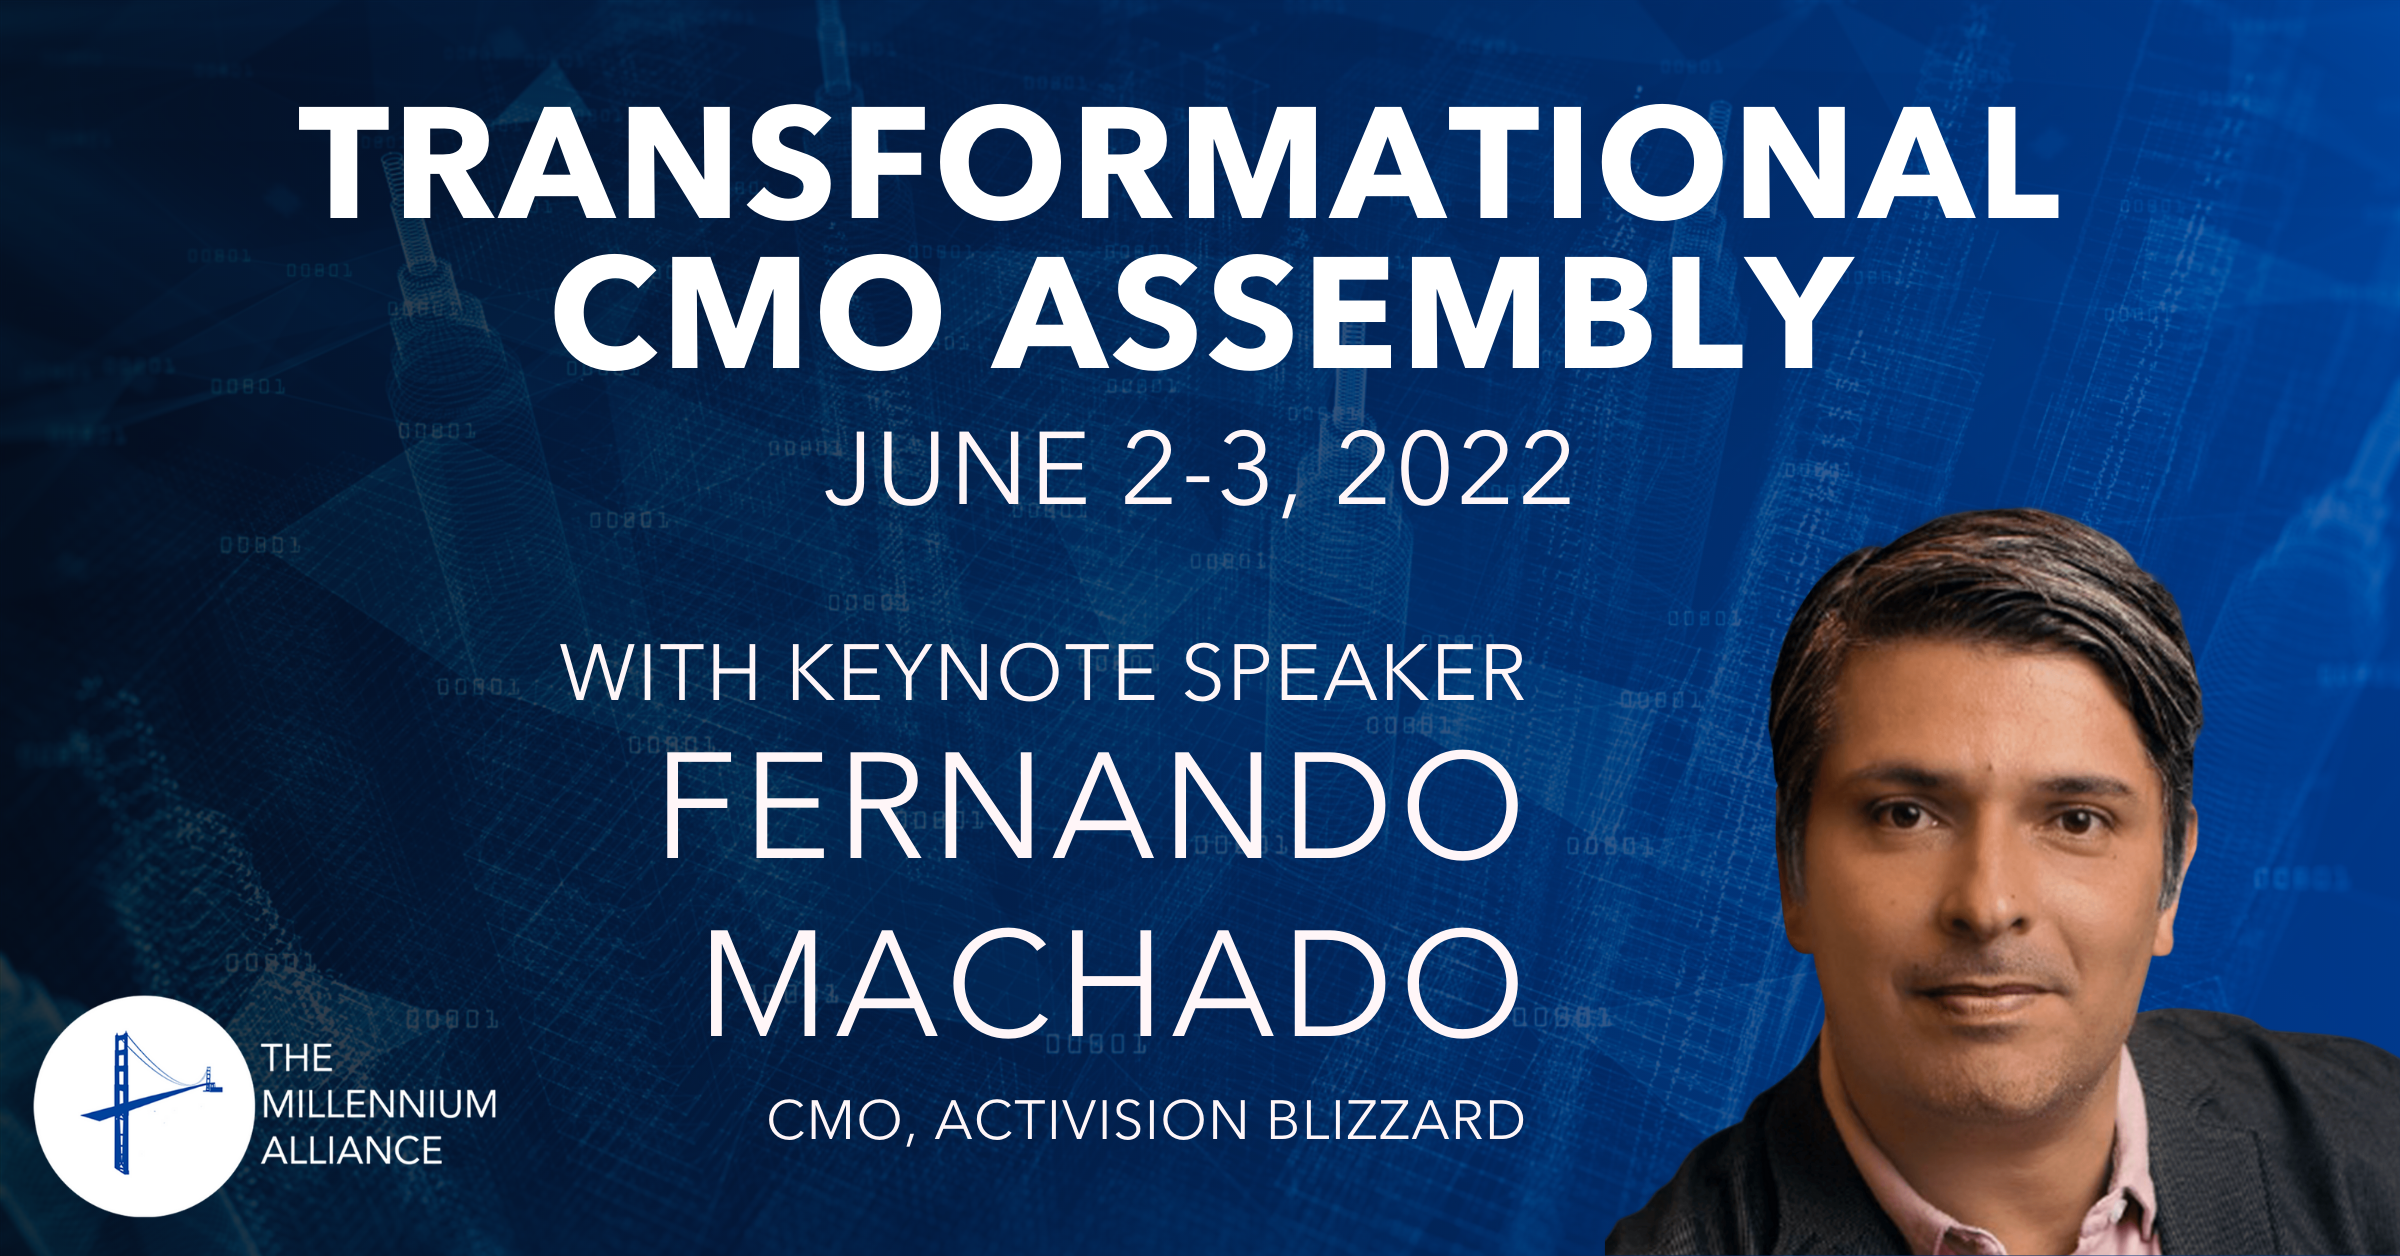 Fernando Machado, CMO of Activision Blizzard, Returns To Keynote Our Transformational CMO Assembly!